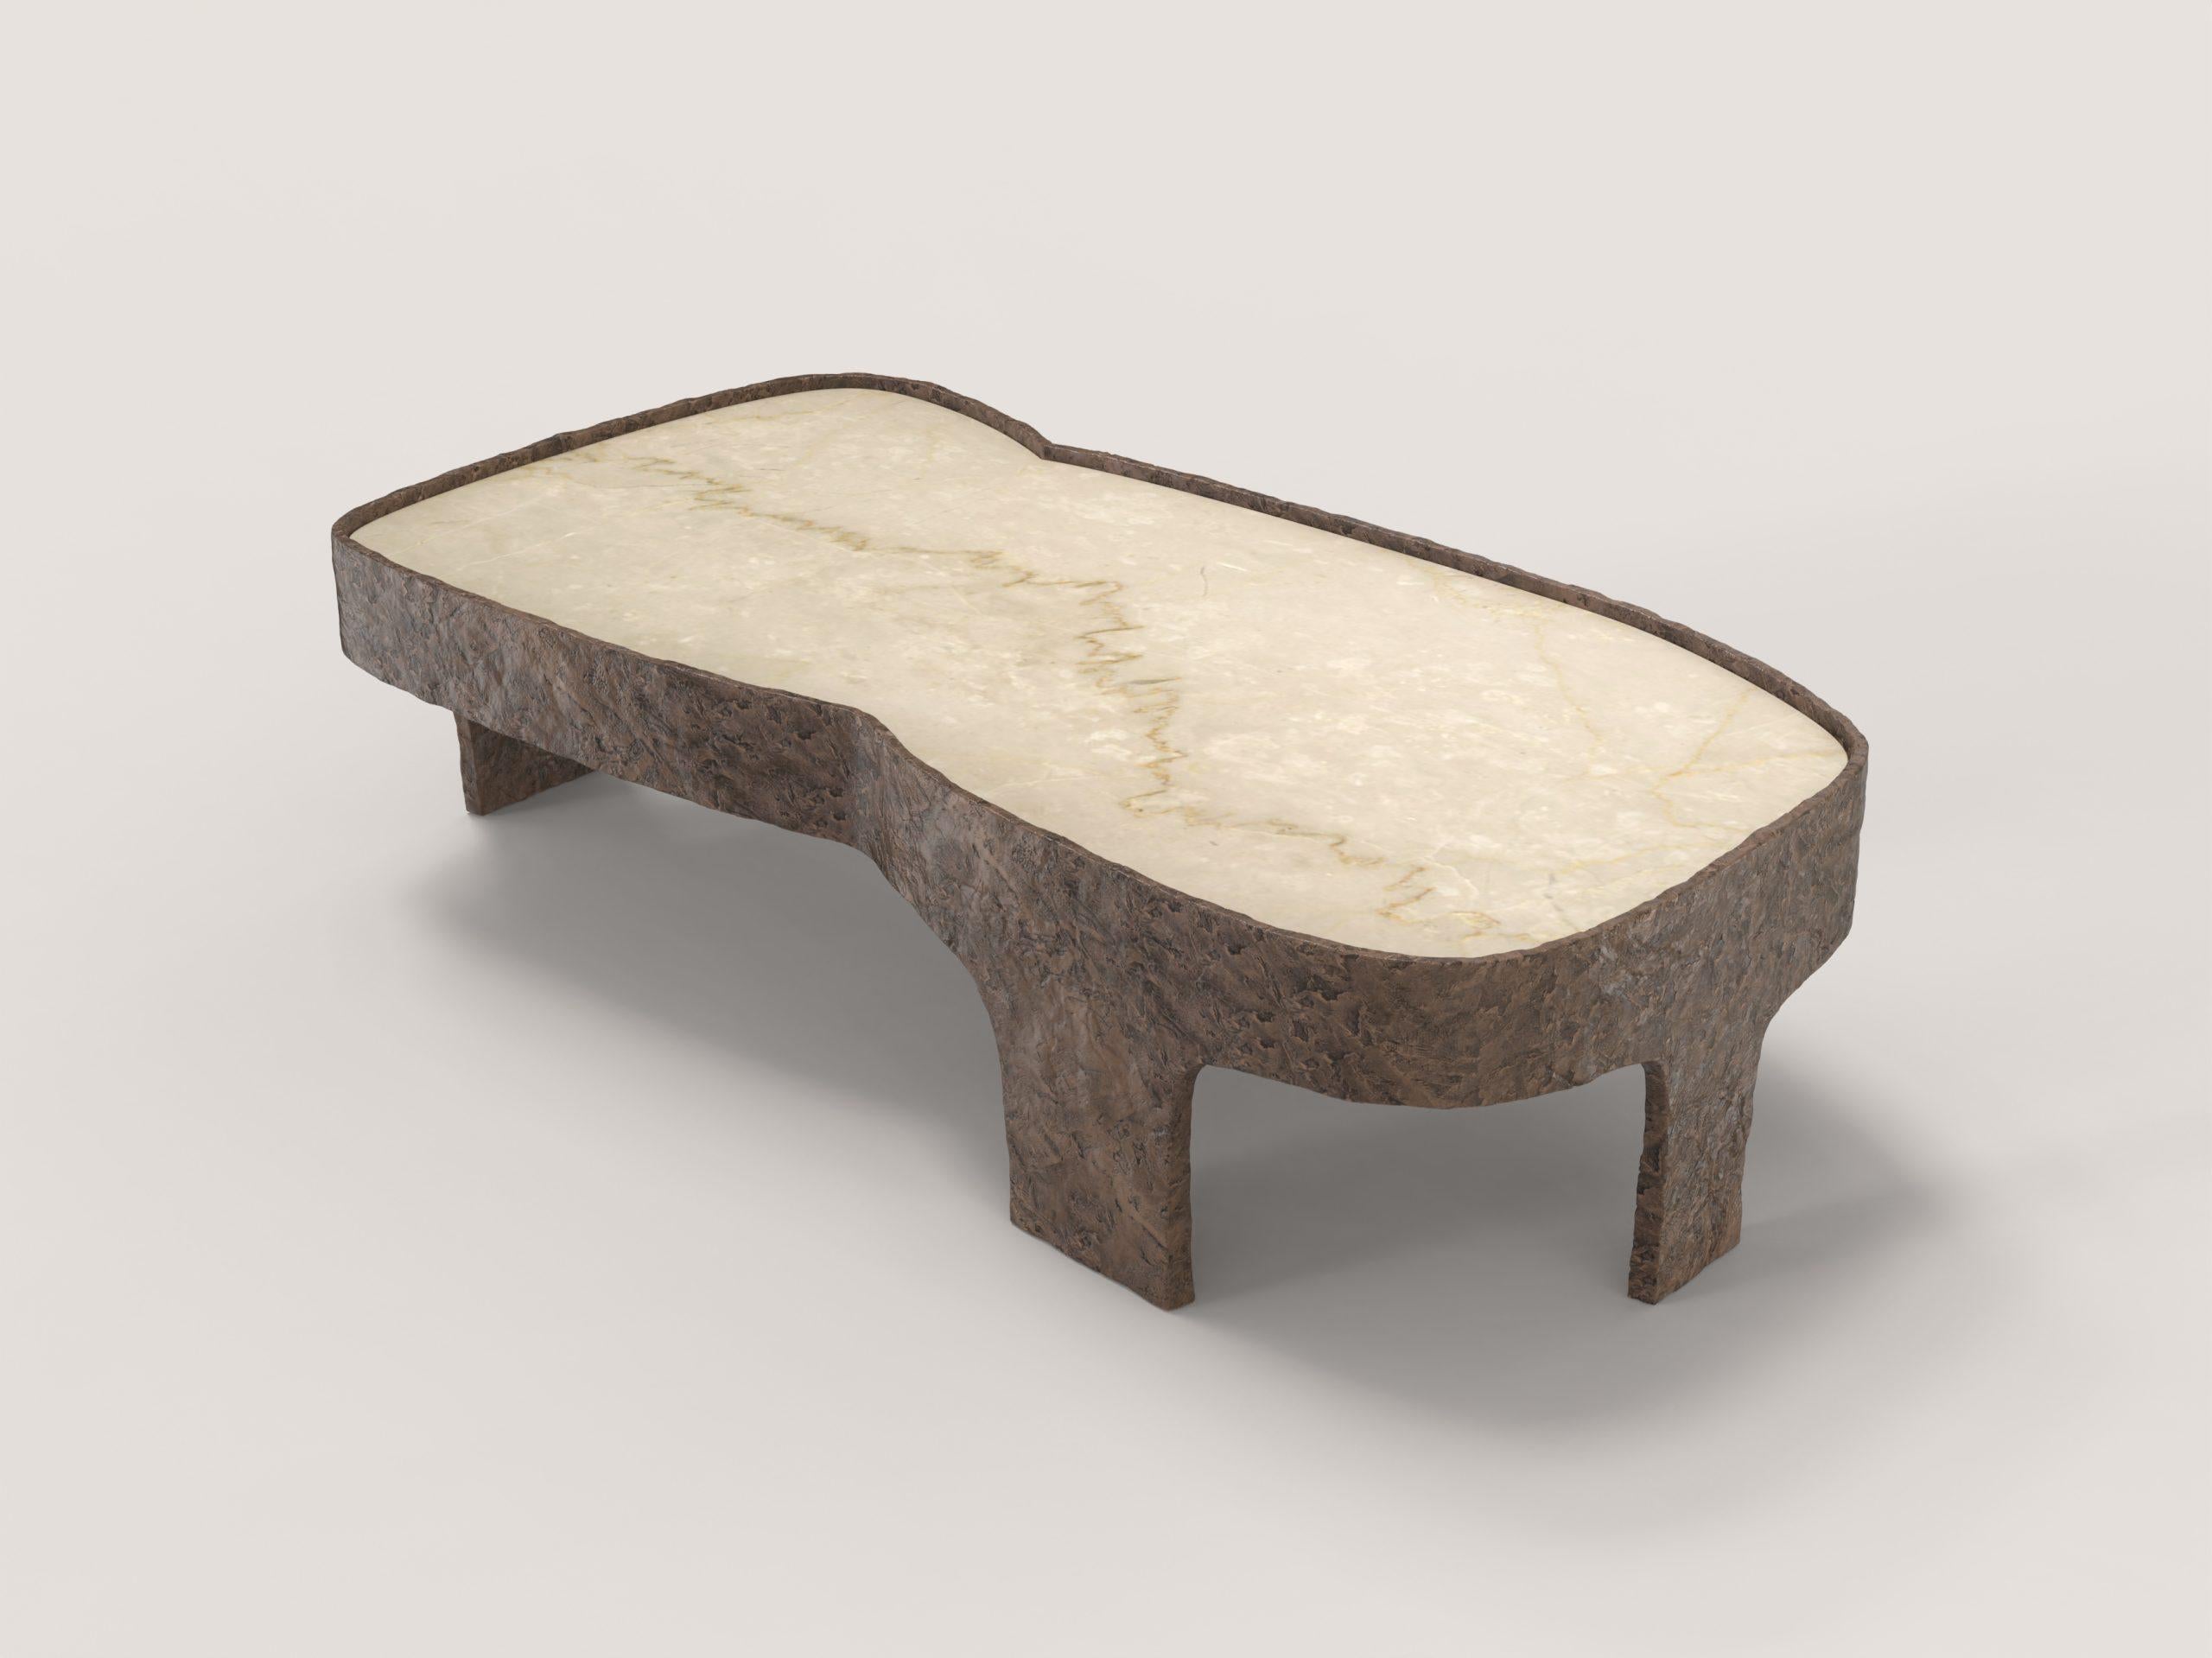 Sumatra Bronze V3 low table by Edizione Limitata
Limited Edition of 15 + 3 pieces. Signed and numbered.
Dimensions: D 60 x W 120 x H 30 cm.
Materials: Bronze and botticino marble.

Sumatra is a 21st Century collection of tables made by Italian